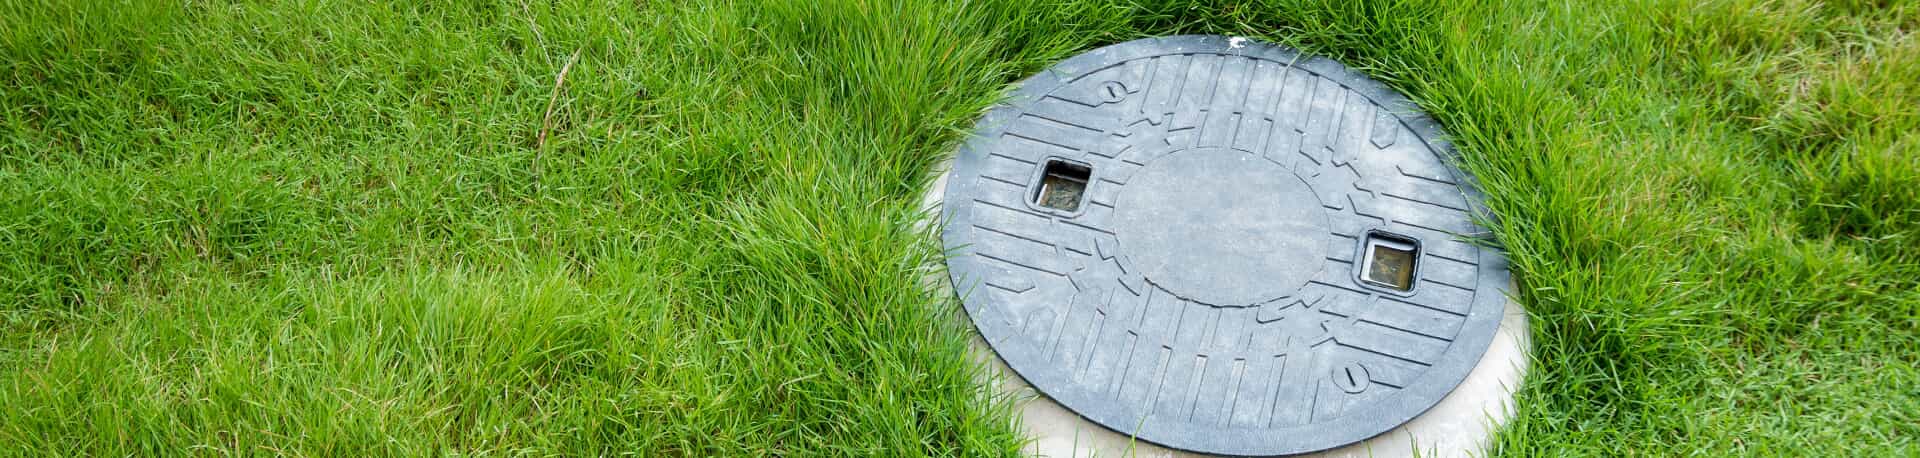 Do all homes have septic tanks? Look for a septic tank cover in the ground